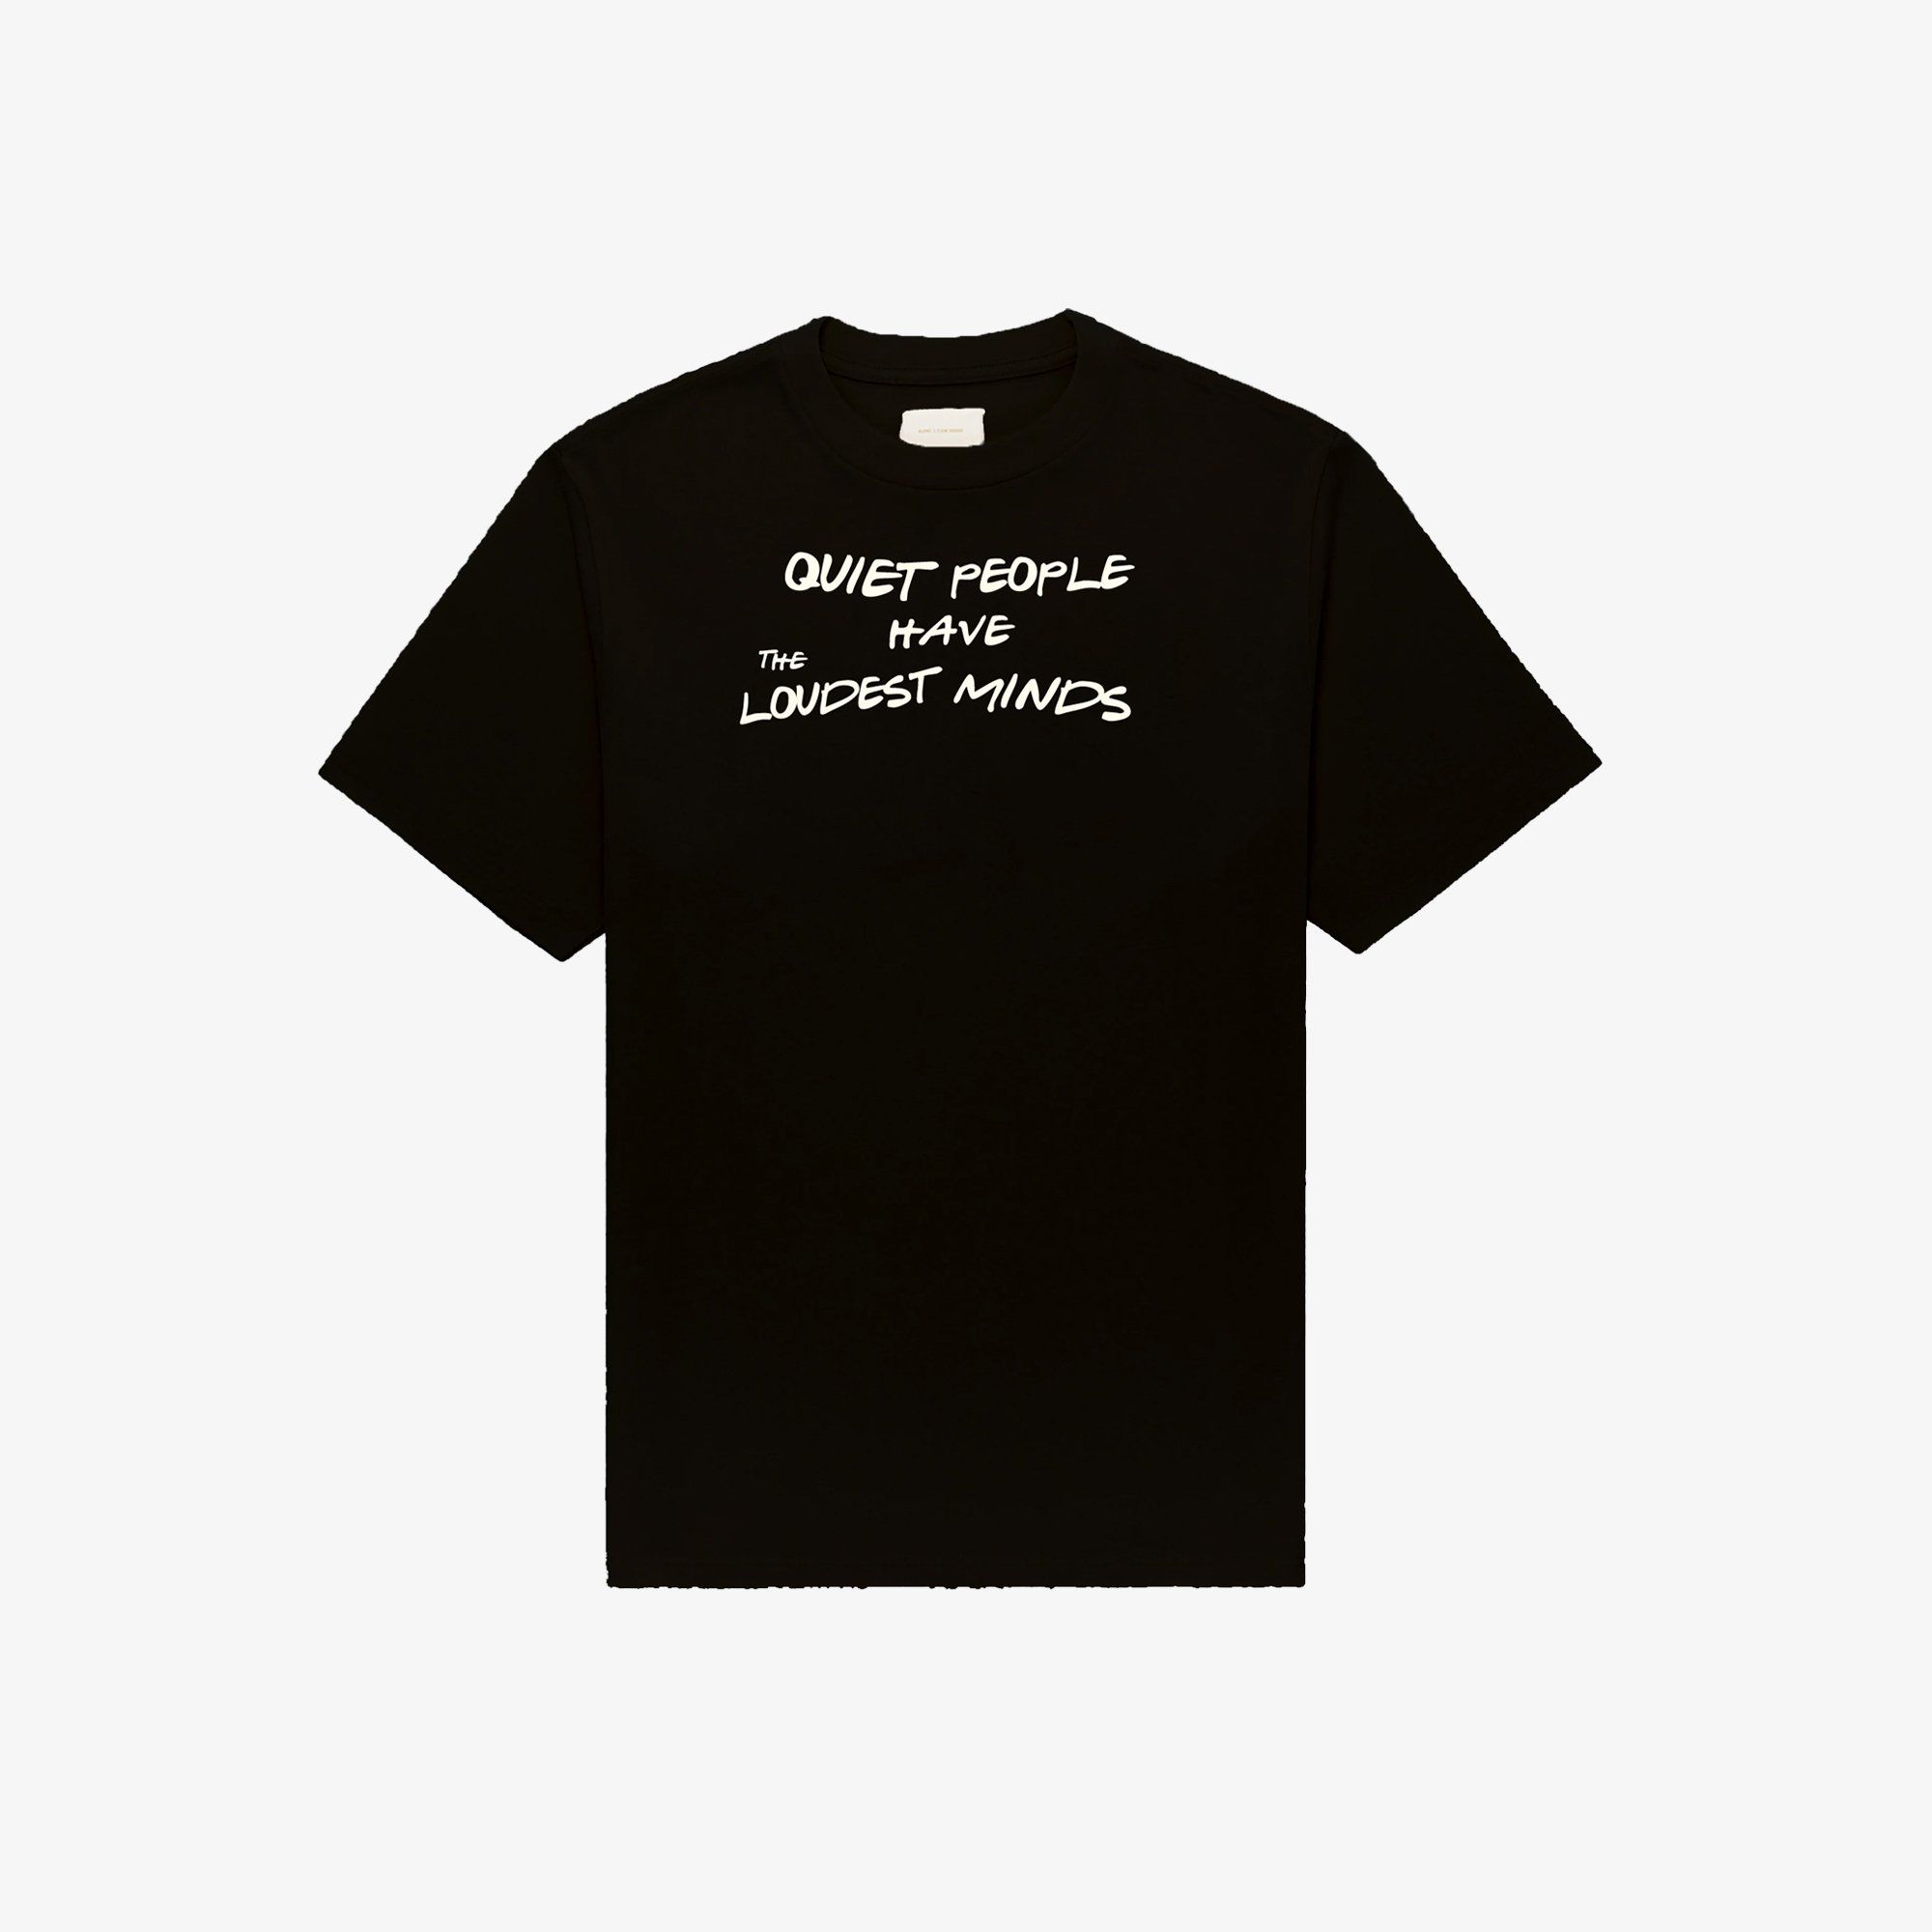  The Quiet People T-shirt - Black 